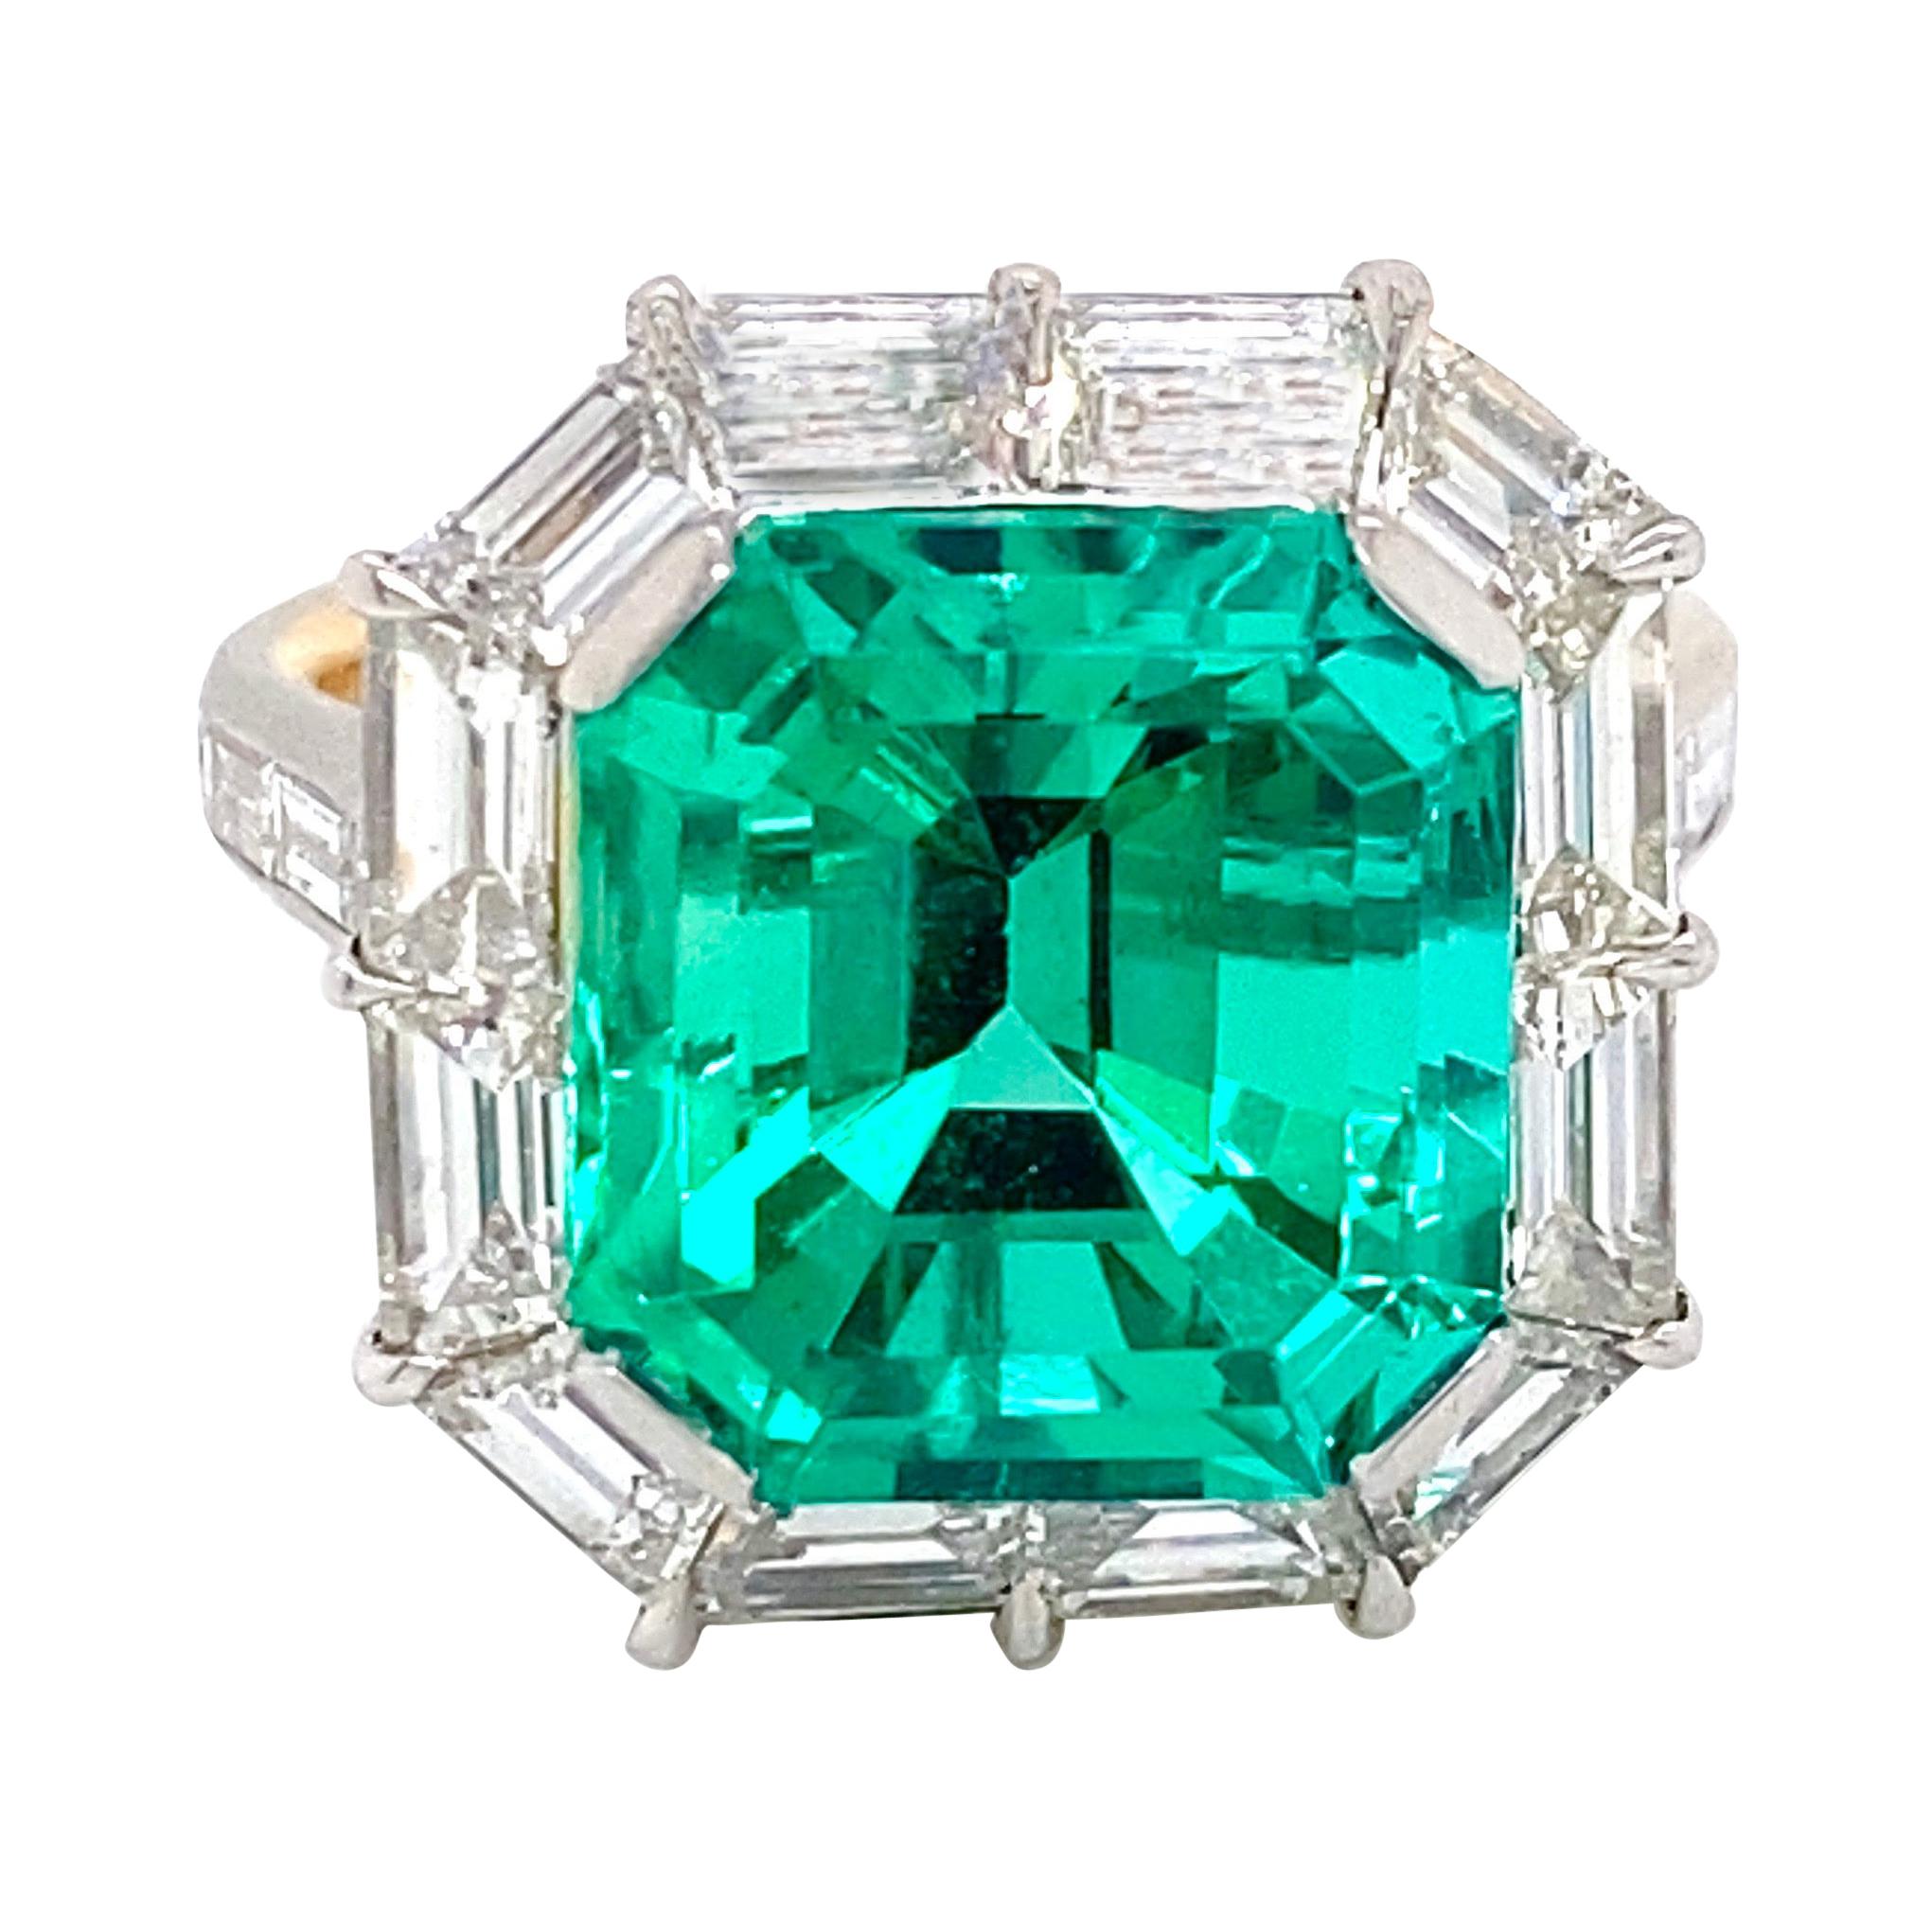 Emilio Jewelry Certified Untreated No Oil Colombian Emerald Ring